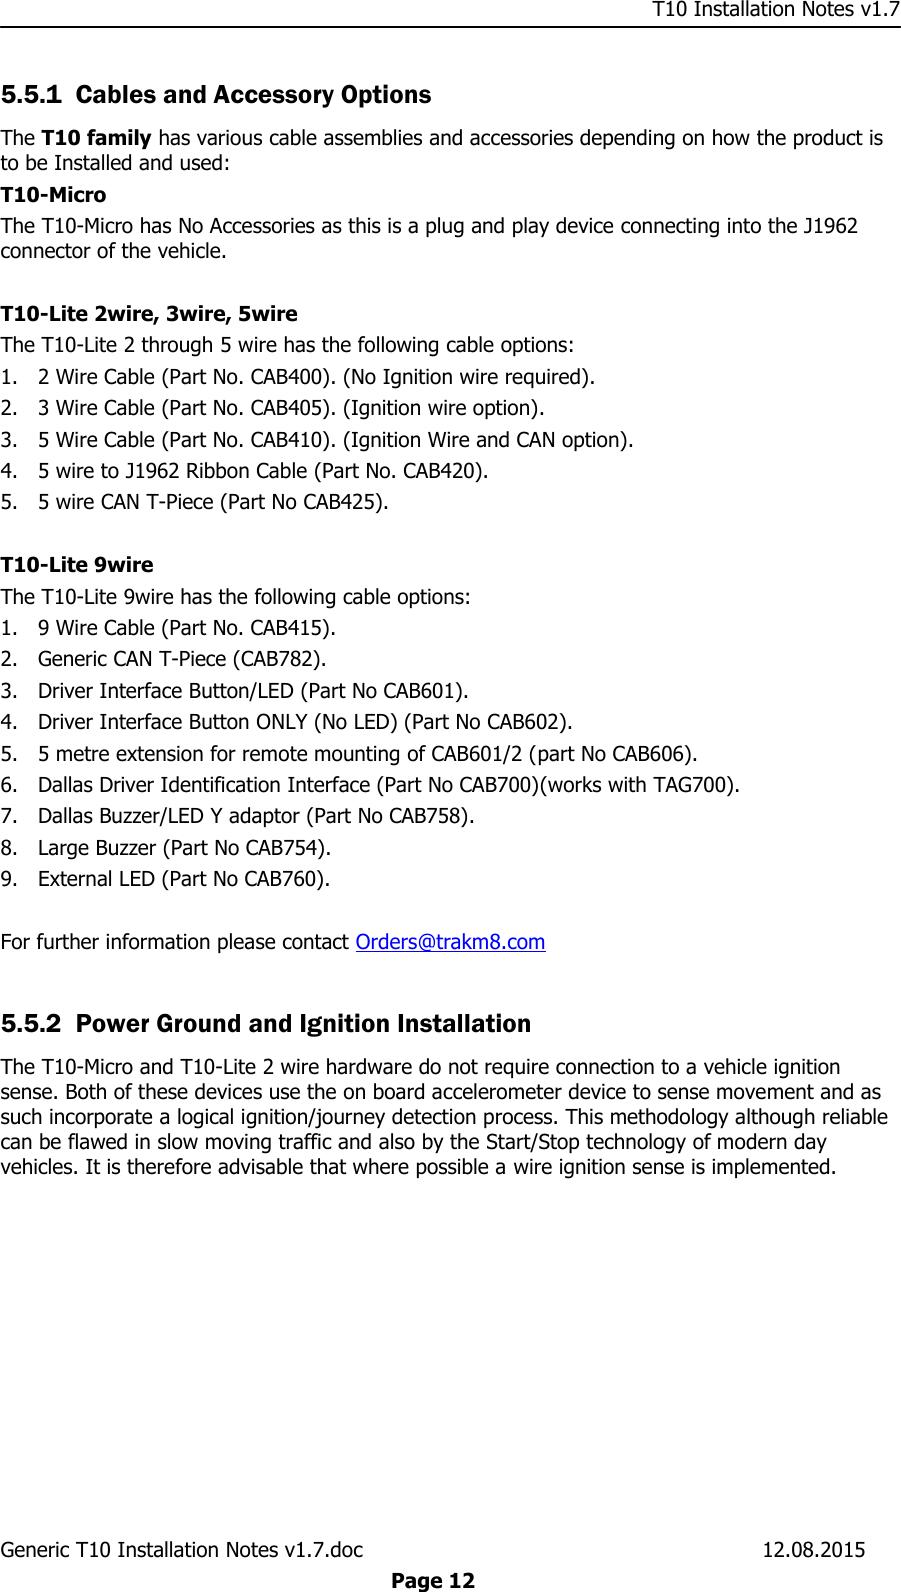     T10 Installation Notes v1.7 Generic T10 Installation Notes v1.7.doc    12.08.2015  Page 12 5.5.1 Cables and Accessory Options The T10 family has various cable assemblies and accessories depending on how the product is to be Installed and used: T10-Micro The T10-Micro has No Accessories as this is a plug and play device connecting into the J1962 connector of the vehicle.  T10-Lite 2wire, 3wire, 5wire The T10-Lite 2 through 5 wire has the following cable options:  1. 2 Wire Cable (Part No. CAB400). (No Ignition wire required). 2. 3 Wire Cable (Part No. CAB405). (Ignition wire option). 3. 5 Wire Cable (Part No. CAB410). (Ignition Wire and CAN option). 4. 5 wire to J1962 Ribbon Cable (Part No. CAB420). 5. 5 wire CAN T-Piece (Part No CAB425).  T10-Lite 9wire The T10-Lite 9wire has the following cable options:  1. 9 Wire Cable (Part No. CAB415). 2. Generic CAN T-Piece (CAB782). 3. Driver Interface Button/LED (Part No CAB601). 4. Driver Interface Button ONLY (No LED) (Part No CAB602). 5. 5 metre extension for remote mounting of CAB601/2 (part No CAB606). 6. Dallas Driver Identification Interface (Part No CAB700)(works with TAG700). 7. Dallas Buzzer/LED Y adaptor (Part No CAB758). 8. Large Buzzer (Part No CAB754). 9. External LED (Part No CAB760).  For further information please contact Orders@trakm8.com  5.5.2 Power Ground and Ignition Installation The T10-Micro and T10-Lite 2 wire hardware do not require connection to a vehicle ignition sense. Both of these devices use the on board accelerometer device to sense movement and as such incorporate a logical ignition/journey detection process. This methodology although reliable can be flawed in slow moving traffic and also by the Start/Stop technology of modern day vehicles. It is therefore advisable that where possible a wire ignition sense is implemented.   